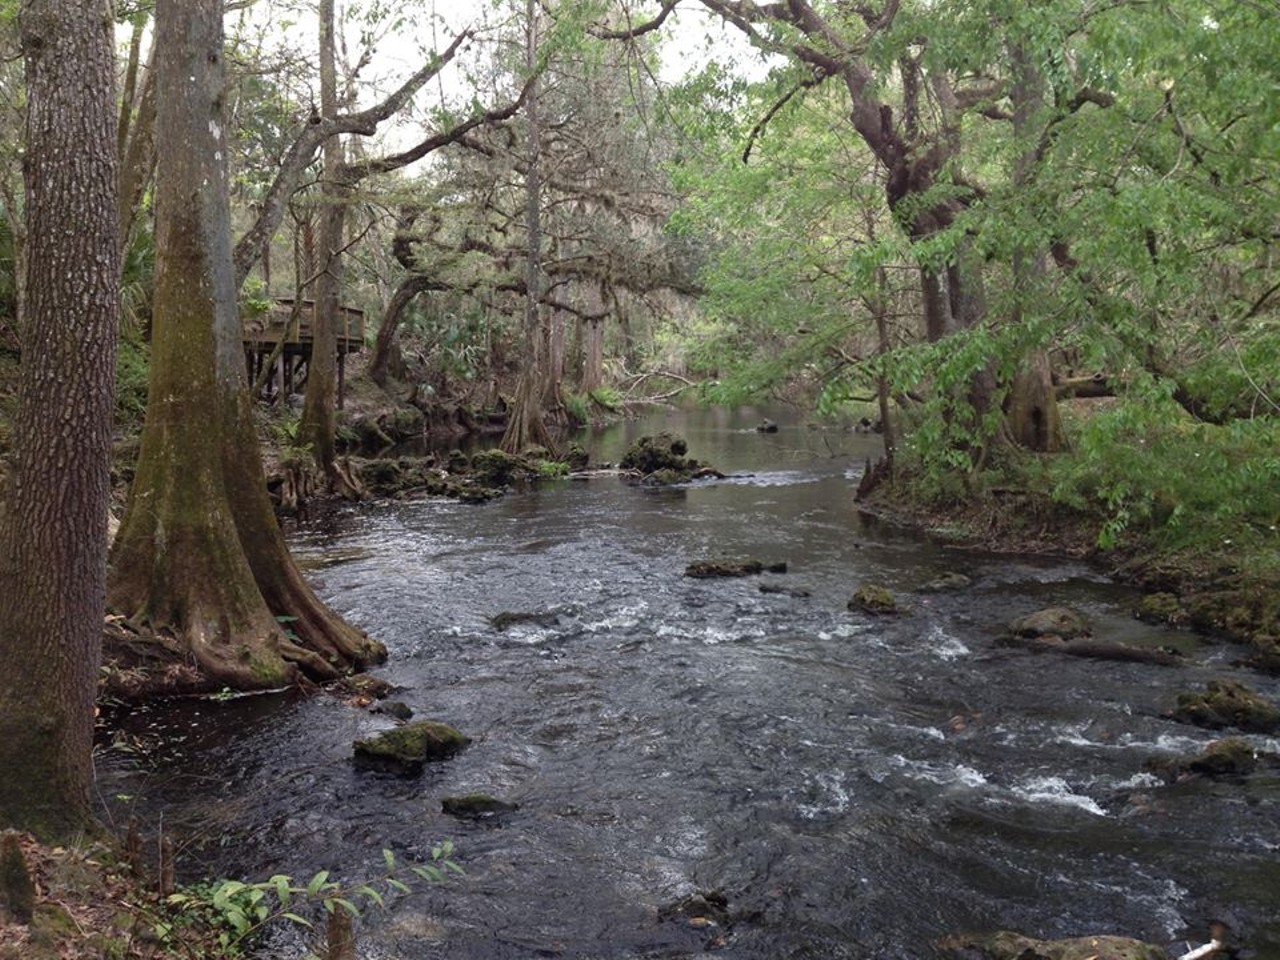 Hillsborough River State Park
Distance from Orlando: 1 hour 20 minutes
This state park&#146;s Class 2 rapids are perfect for those seeking a little thrill along with their camping trip. You can also take a guided tour of Fort Foster, the only standing replica of a Second Seminole War fort in the United States. 
Photo via Florida State Parks/Facebook